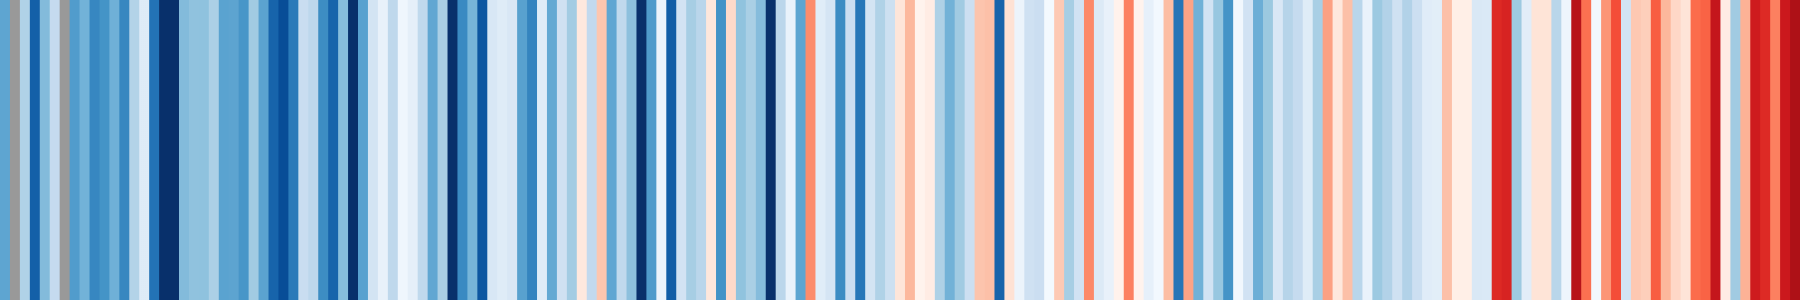 Maryland climate stripes - illustrating increasing warmer temperatures - climate change